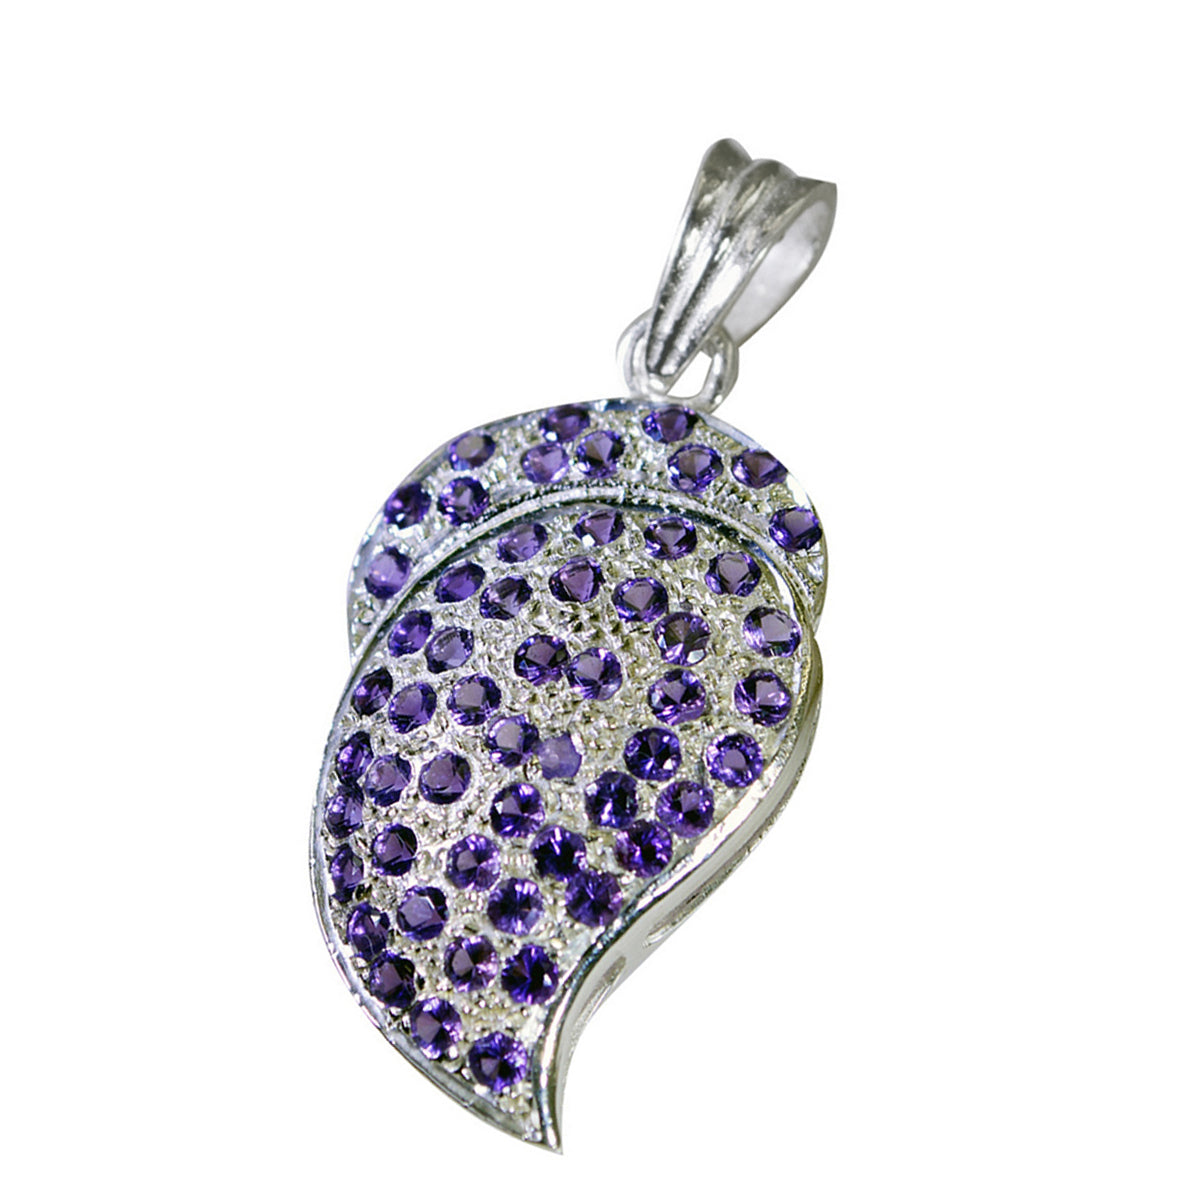 Riyo Gorgeous Gems Round Faceted Purple Amethyst Solid Silver Pendant Gift For Easter Sunday